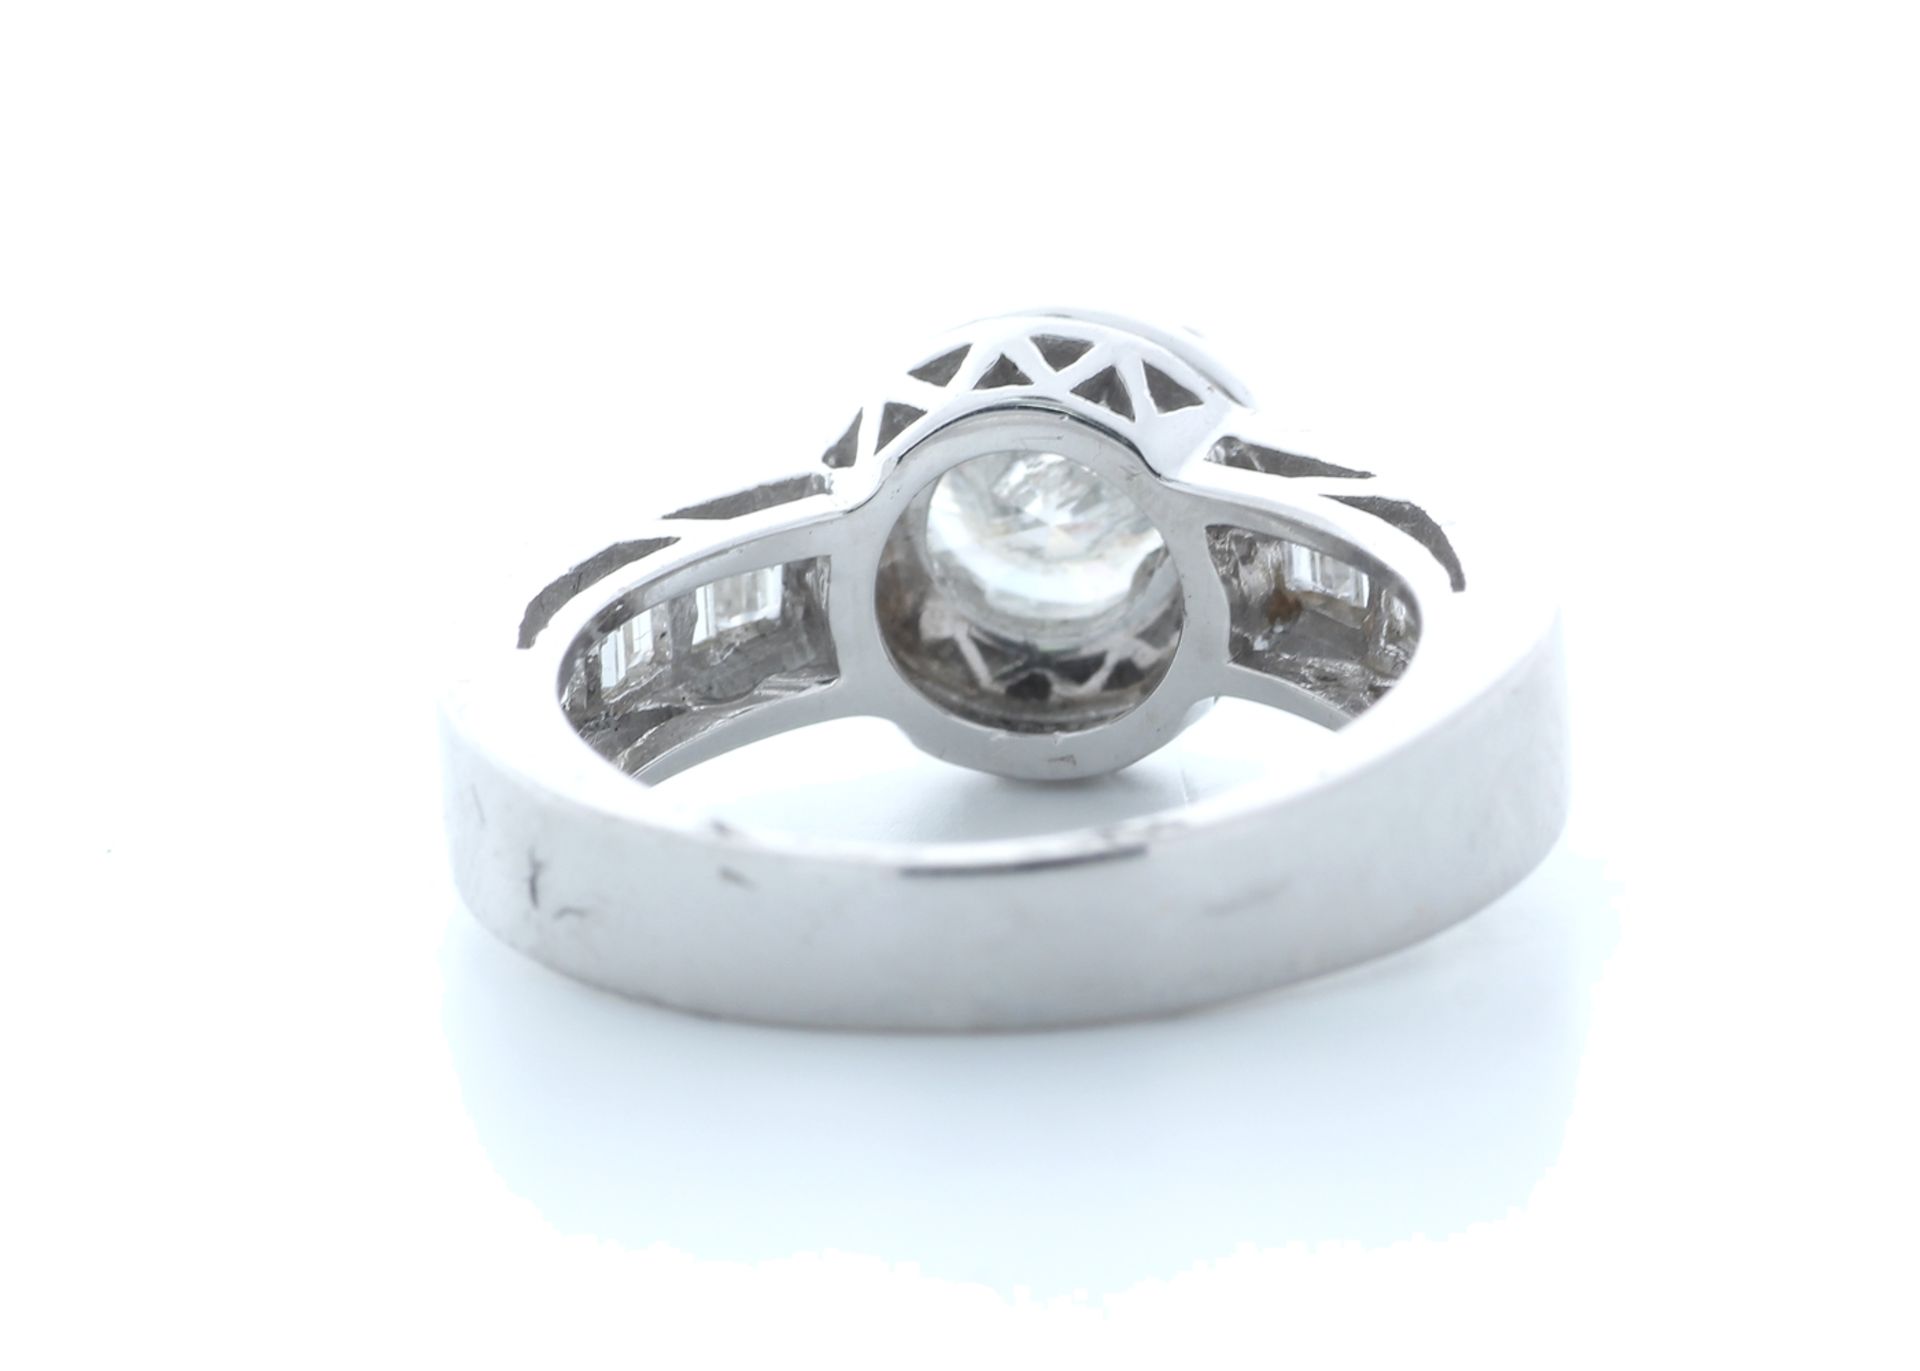 18ct White Gold Single Stone With Halo Setting Ring 2.62 (1.22) Carats - Valued by IDI £26,000. - Image 3 of 5